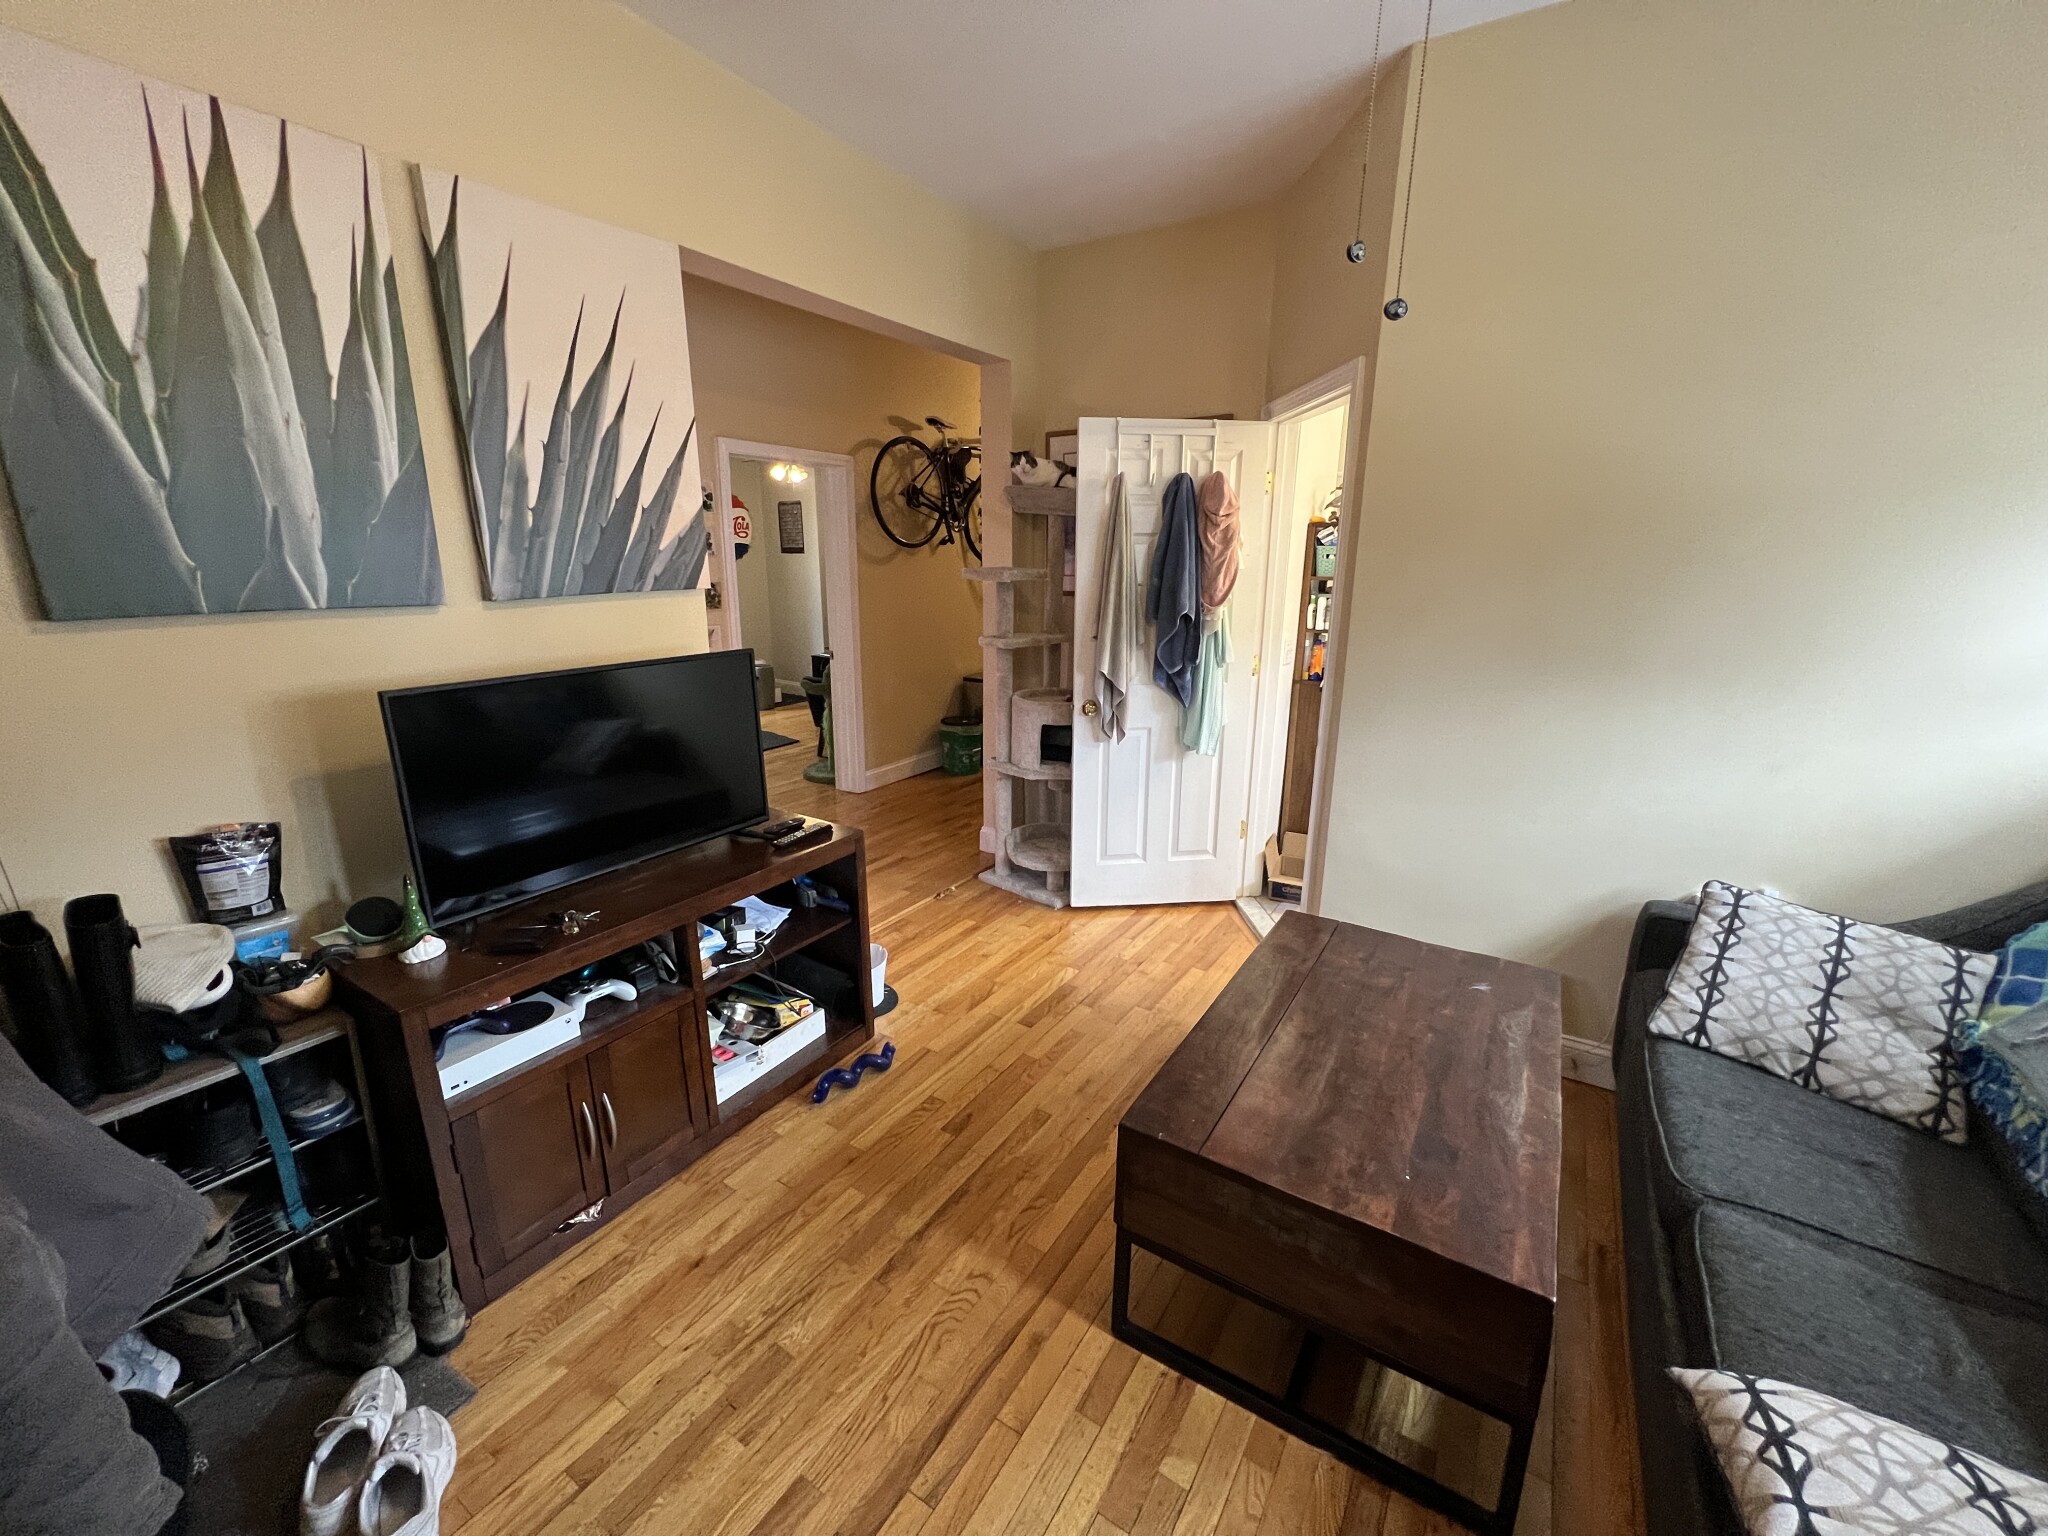 Photos of apartment on Irving S,Somerville MA 02144